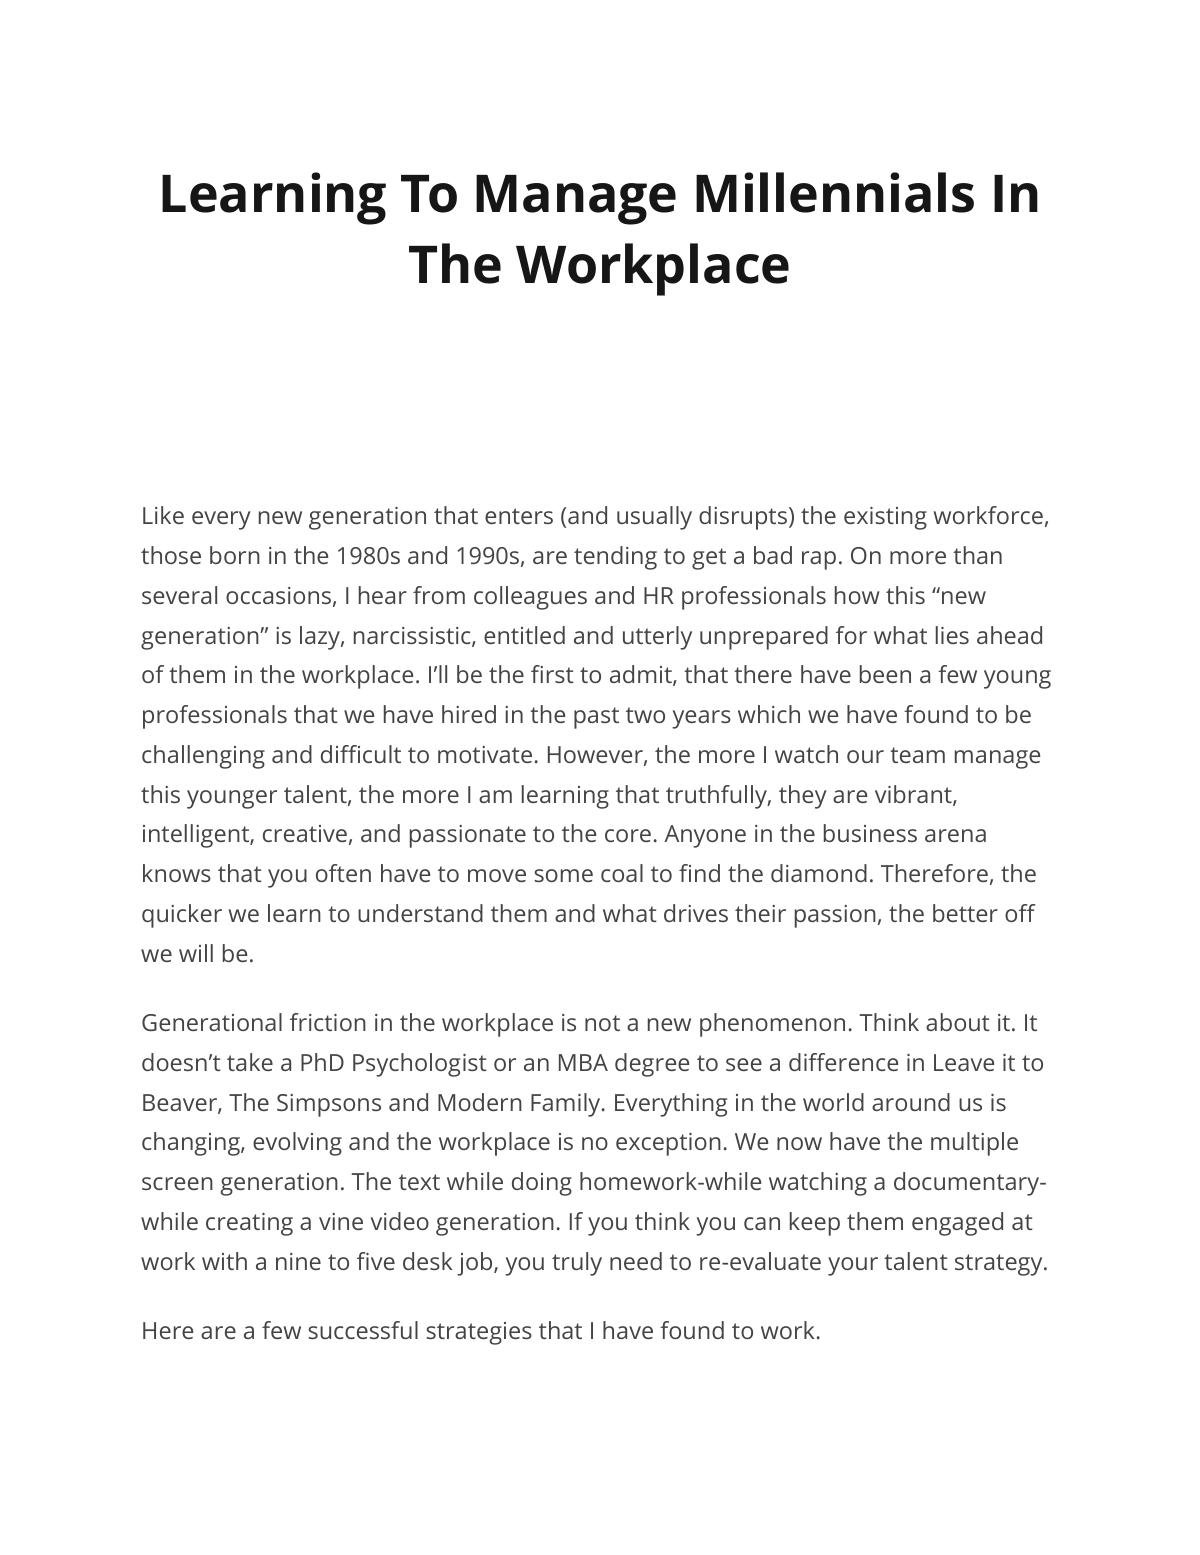 Learning To Manage Millennials In The Workplace    